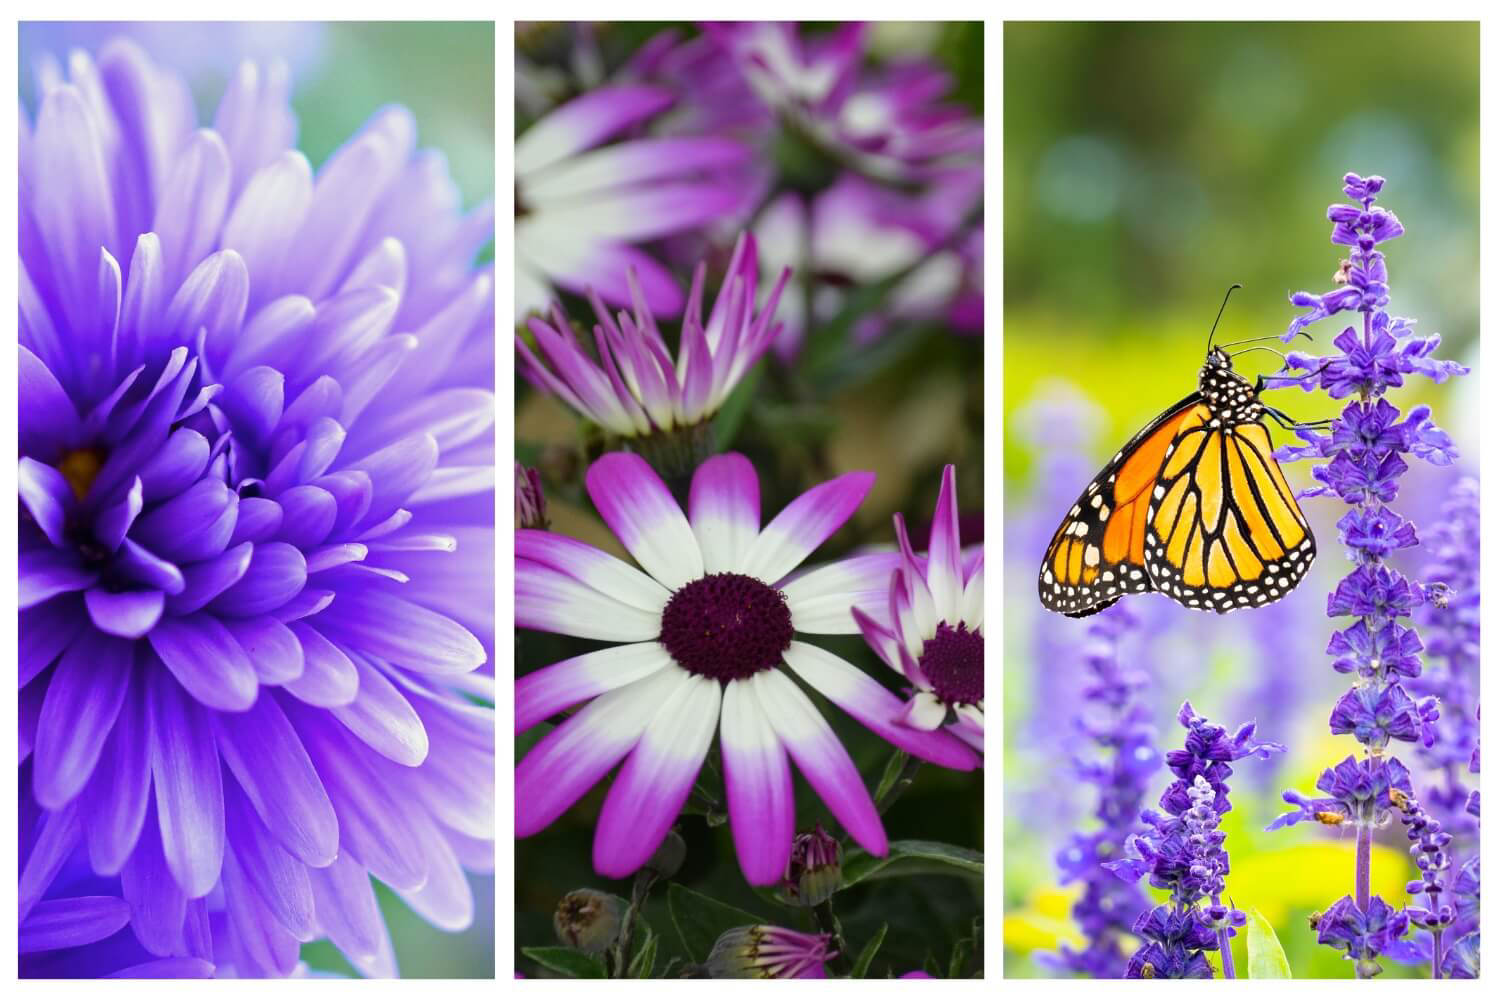 100 Types of Purple Flowers: From Pale Lavender to Moody Plum